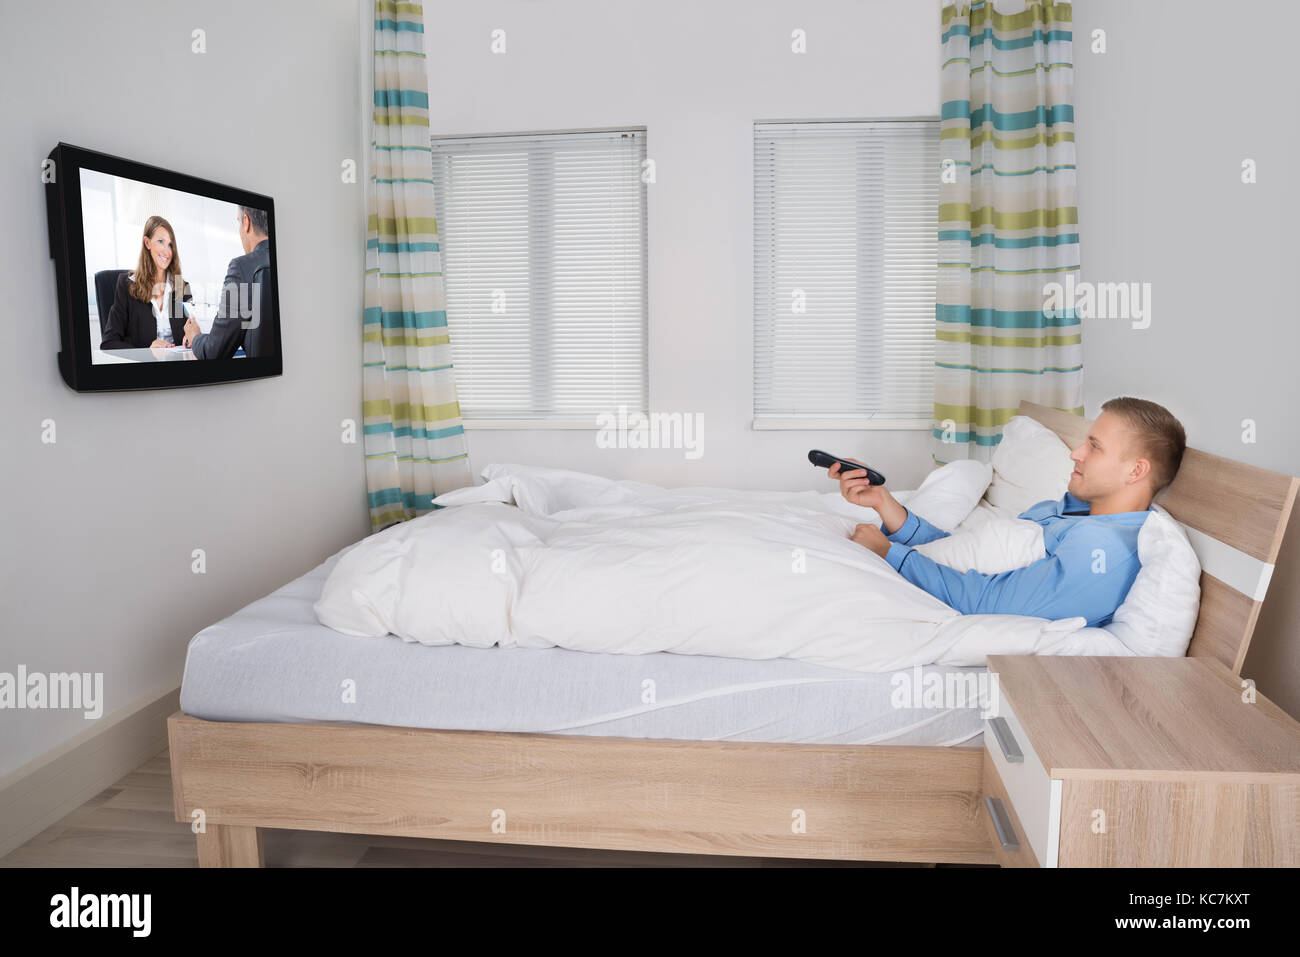 Young Man Holding Remote While Watching Television In His Bedroom Stock Photo